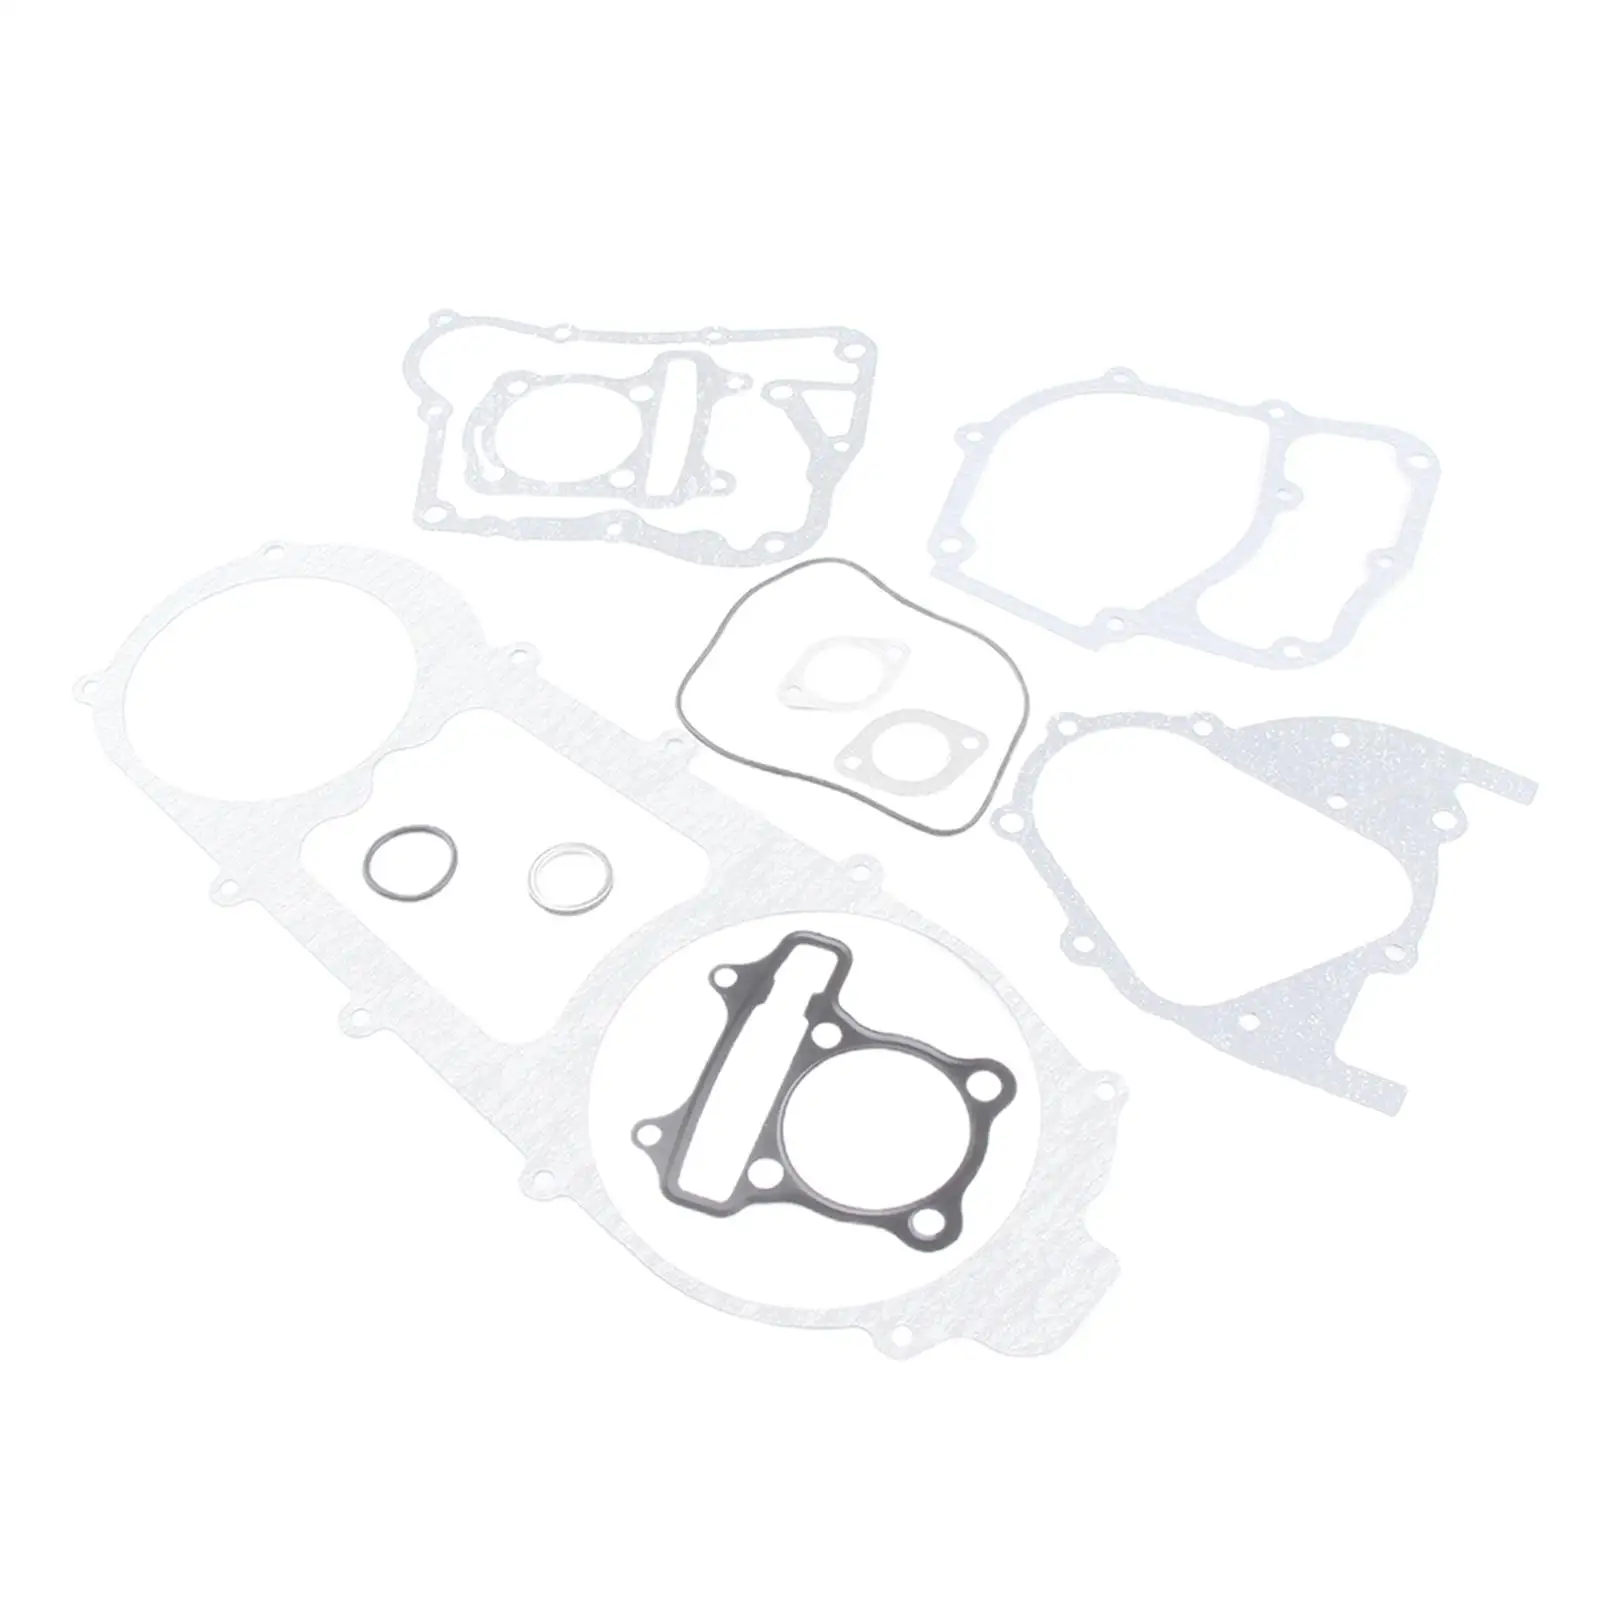 Complete Engine Head Gasket Set for GY6 150cc Moped Scooters Go Karts QuadTop Quality Guaranteed.